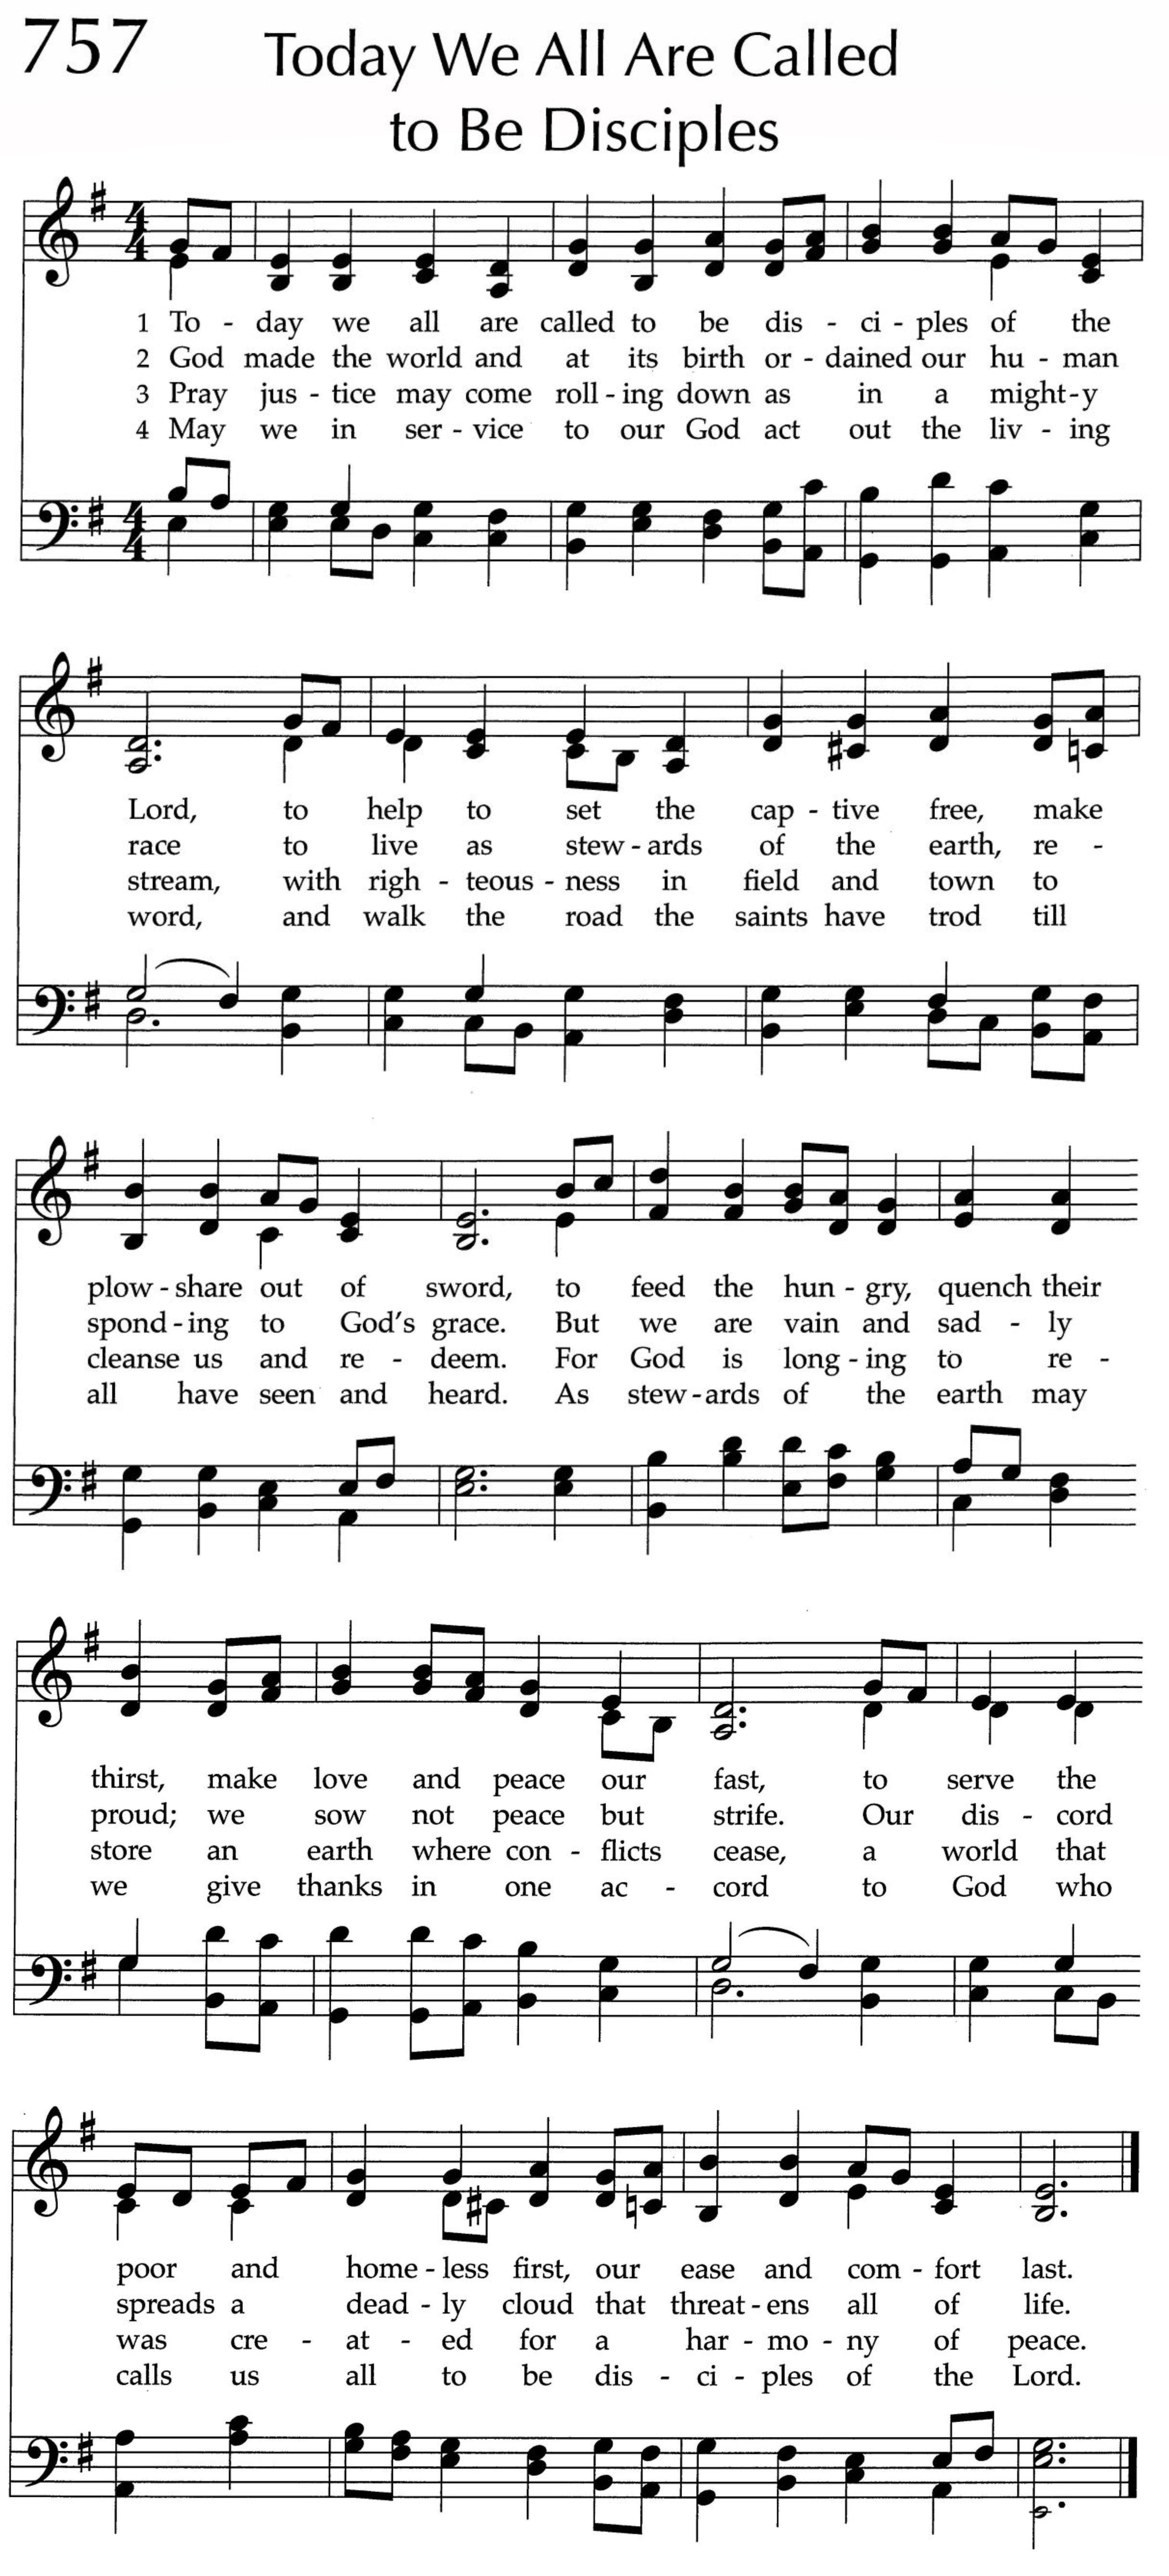 Hymnal page: 757, "Today We All Are Called to Be Disciples"